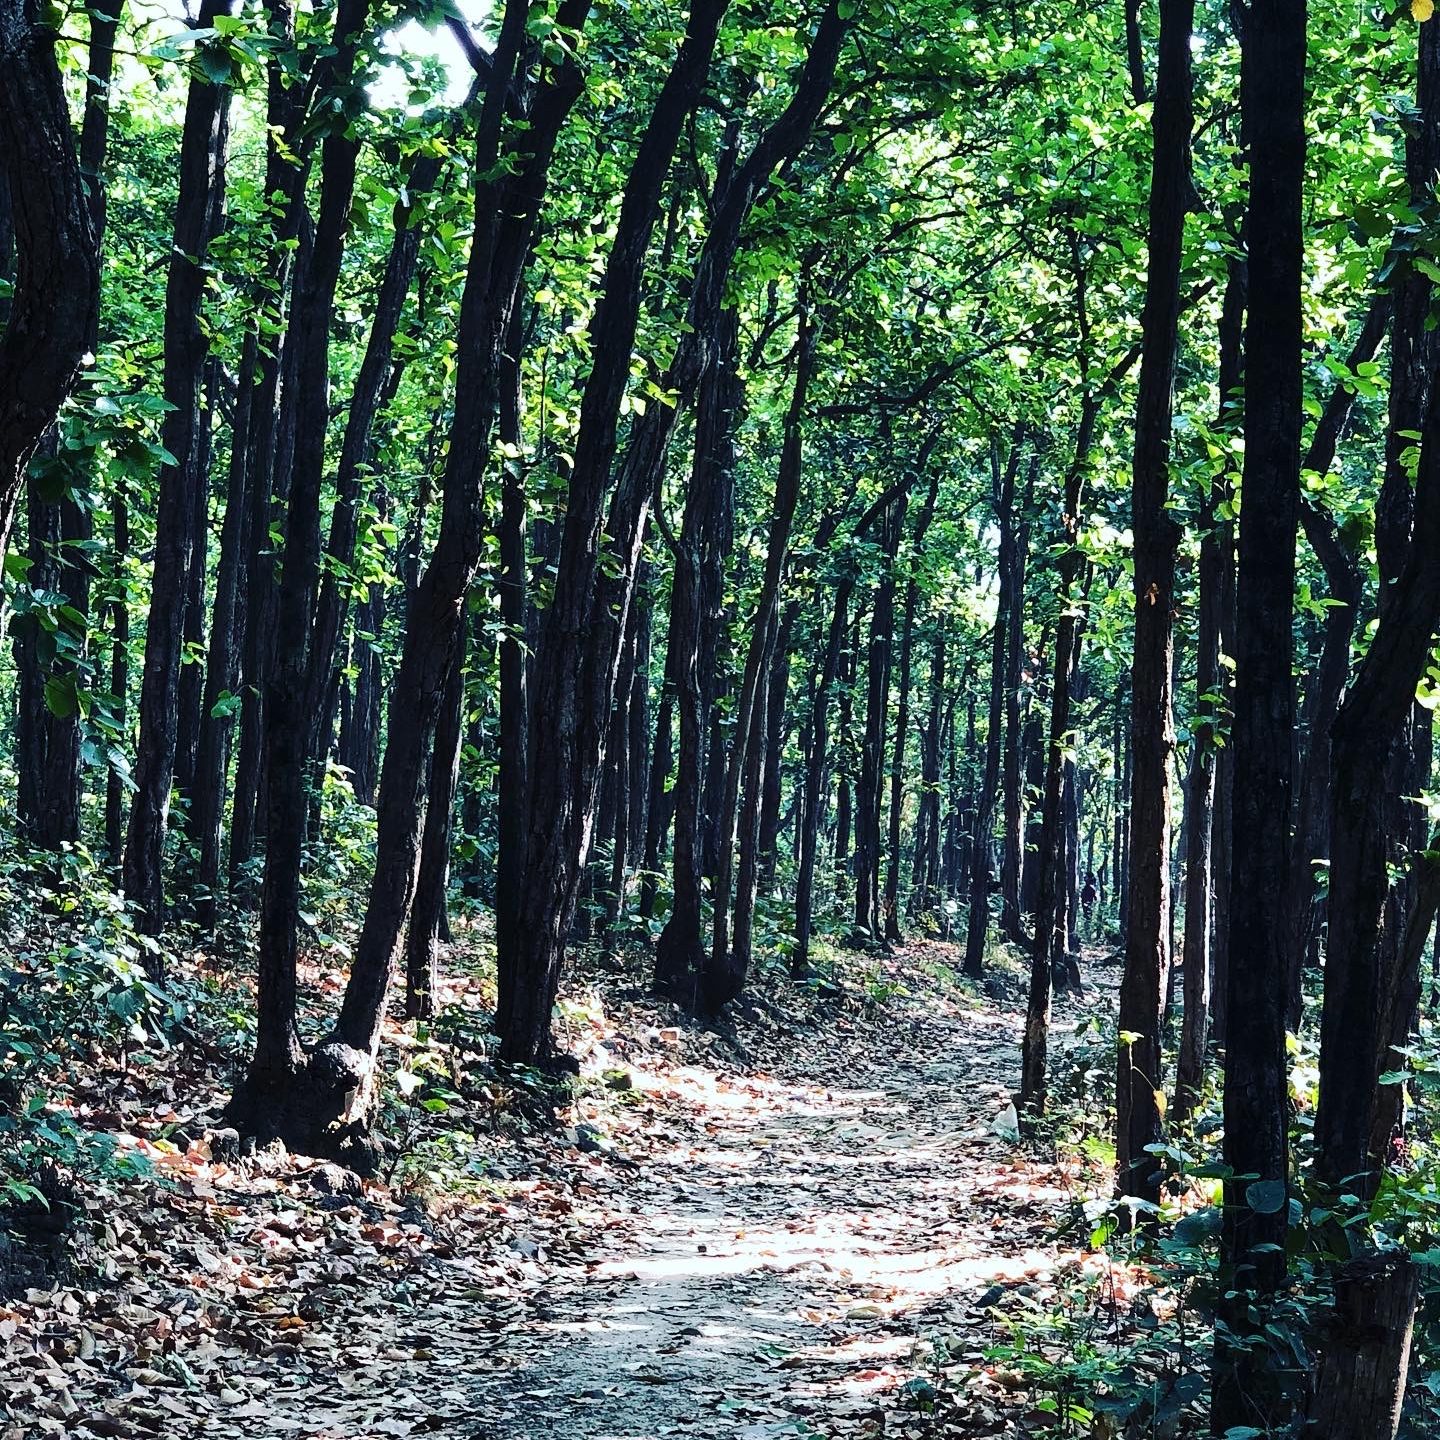 Sura Devi Temple trail through the Sal forests